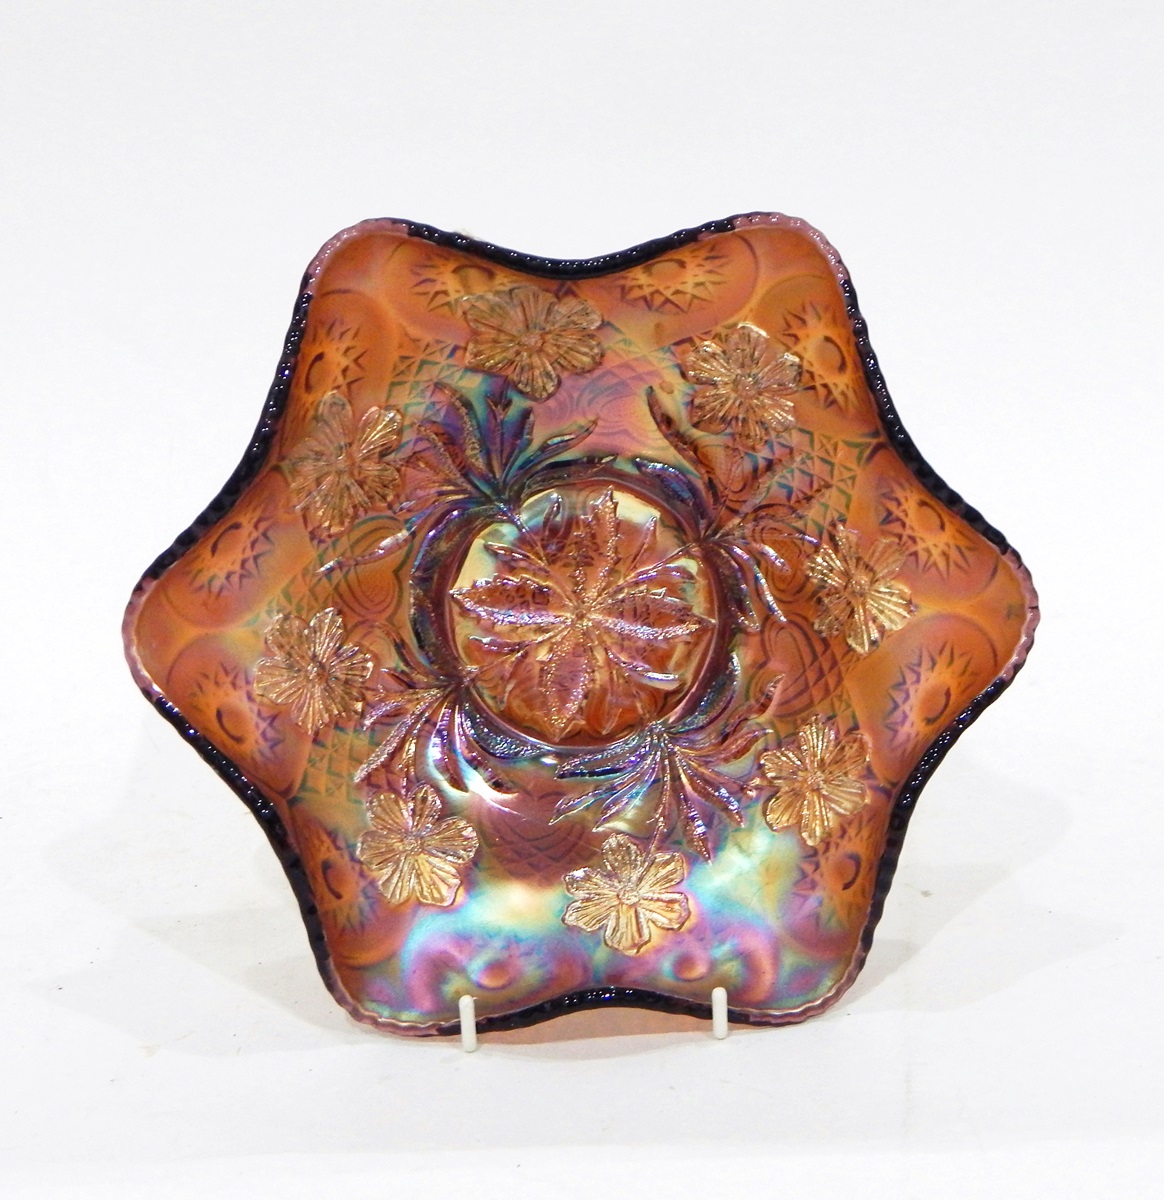 Amethyst carnival glass bowl by Millersburg in the 'Primrose' pattern, - Image 5 of 5